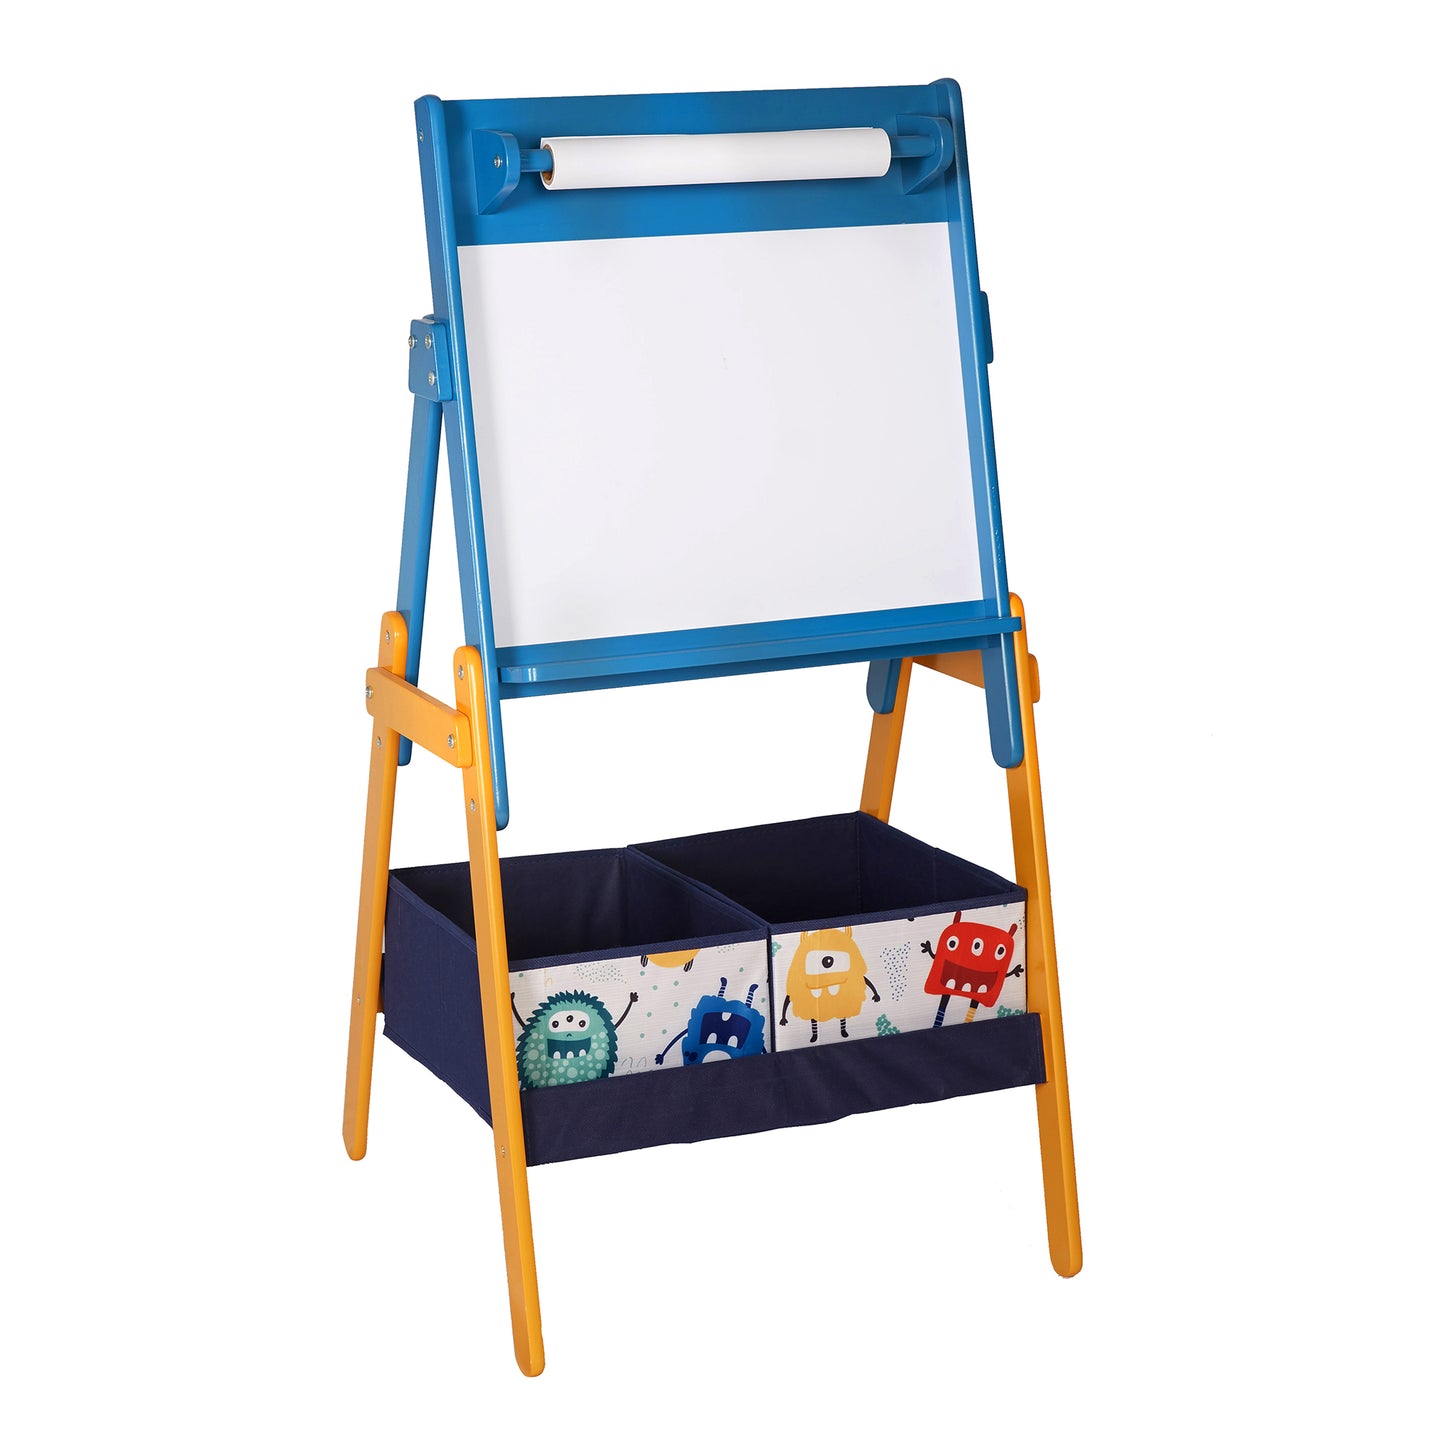 Children's wooden writing and drawing board, double-sided, with magnets - GHOSTS